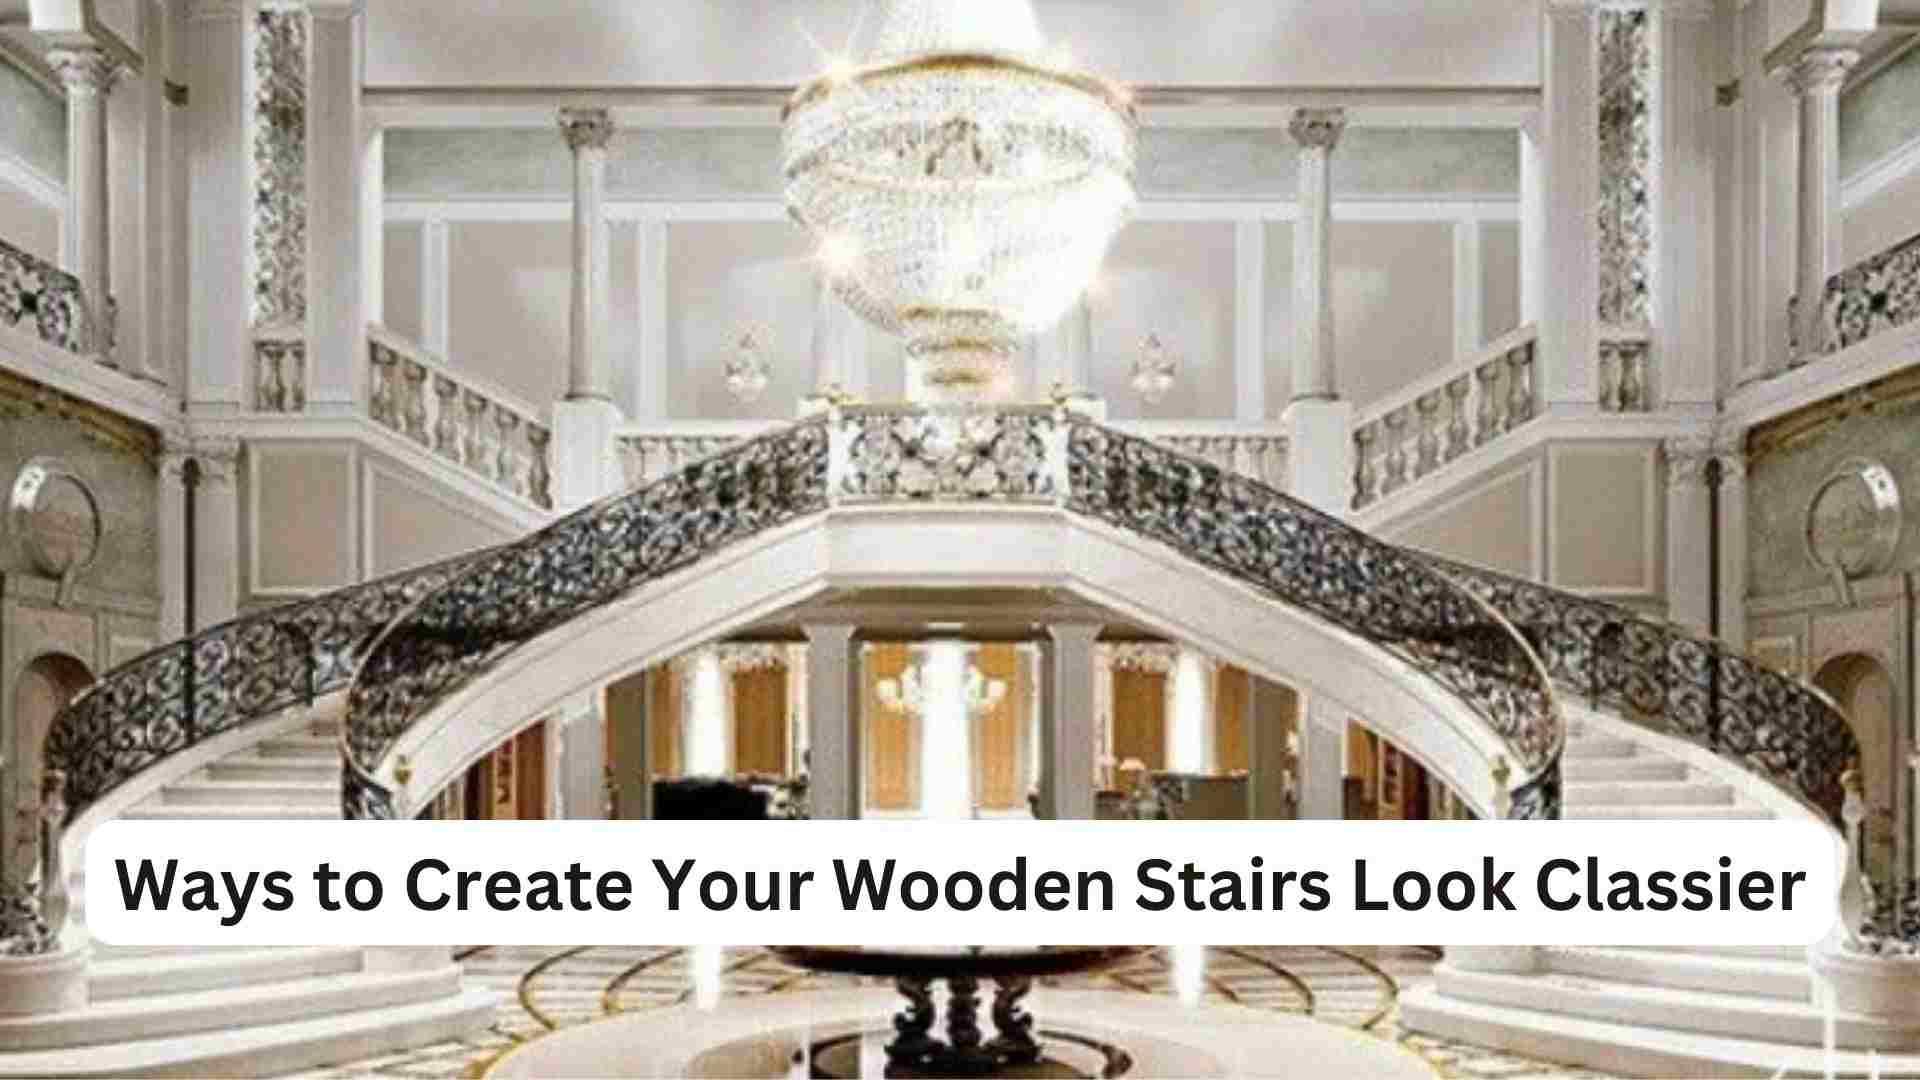 Ways to Create Your Wooden Stairs Look Classier